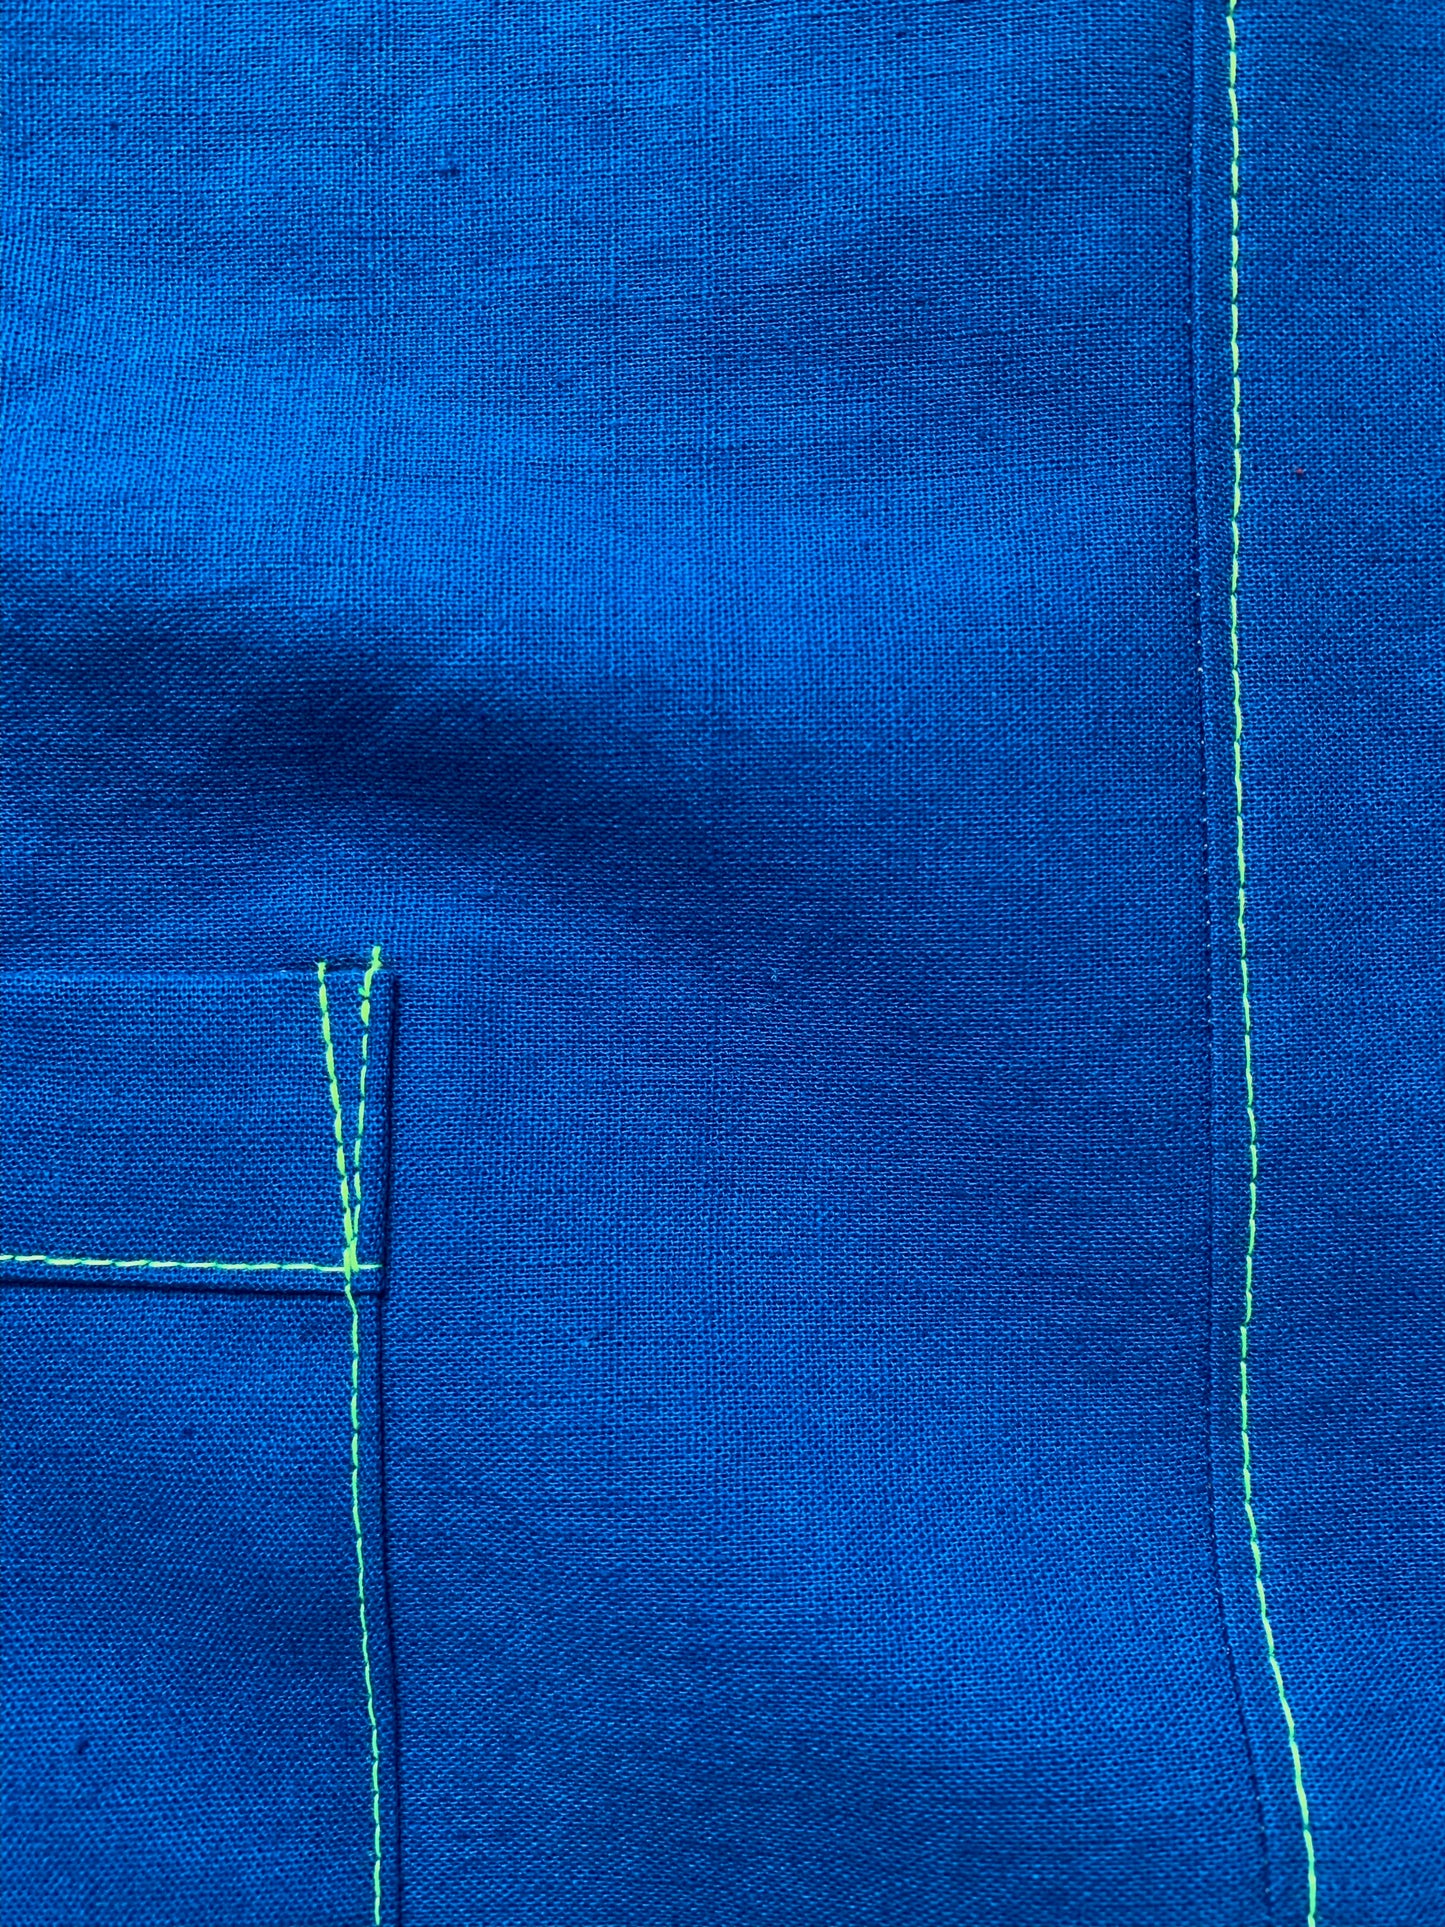 Brightest blue tunic with neon yellow/green topstitching and one big pocket. 55% linen, 45% cotton, medium weight.